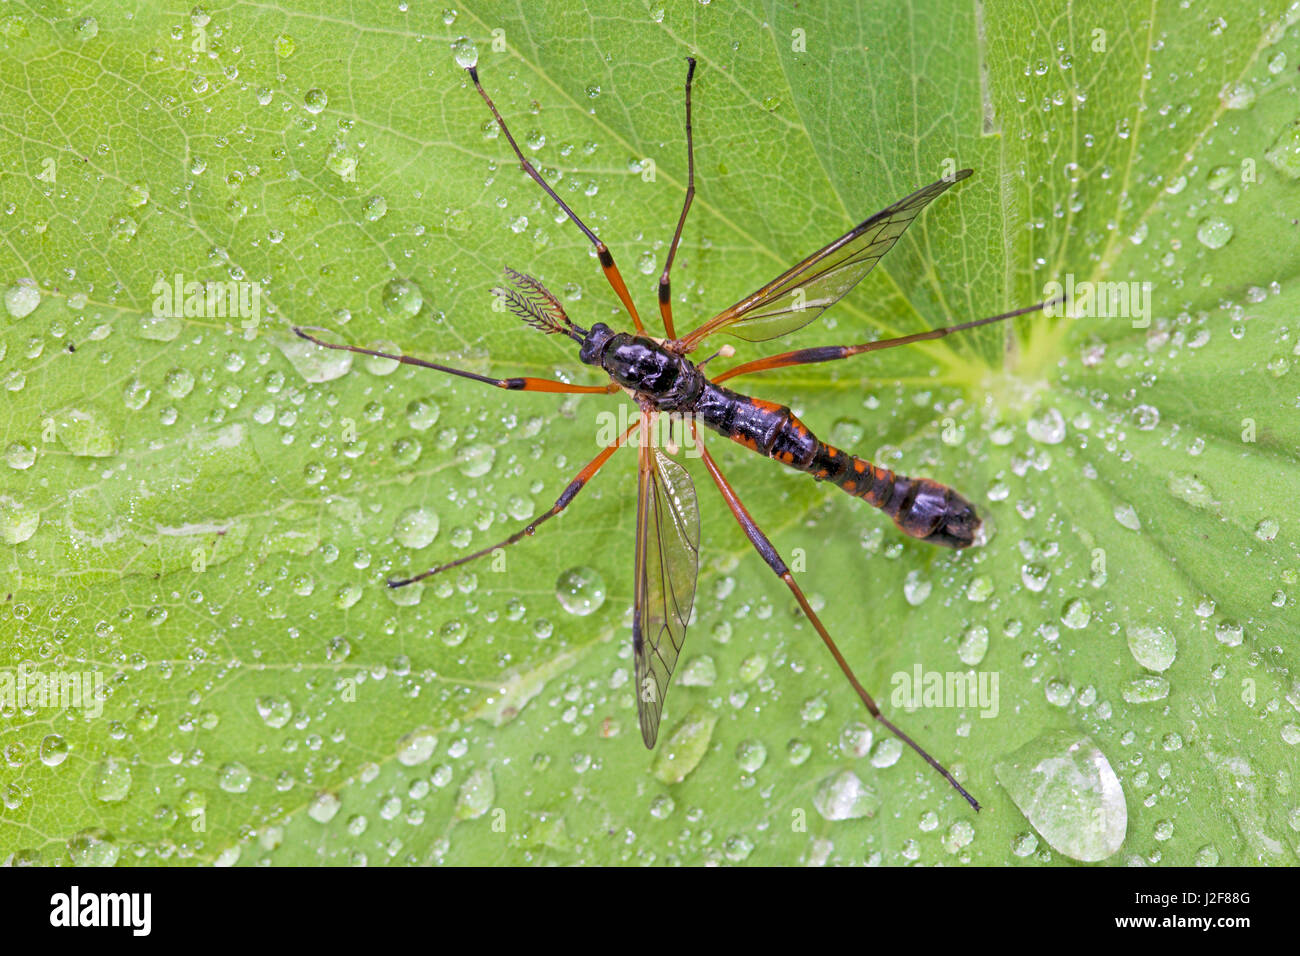 crane fly on leaf with dew drops Stock Photo